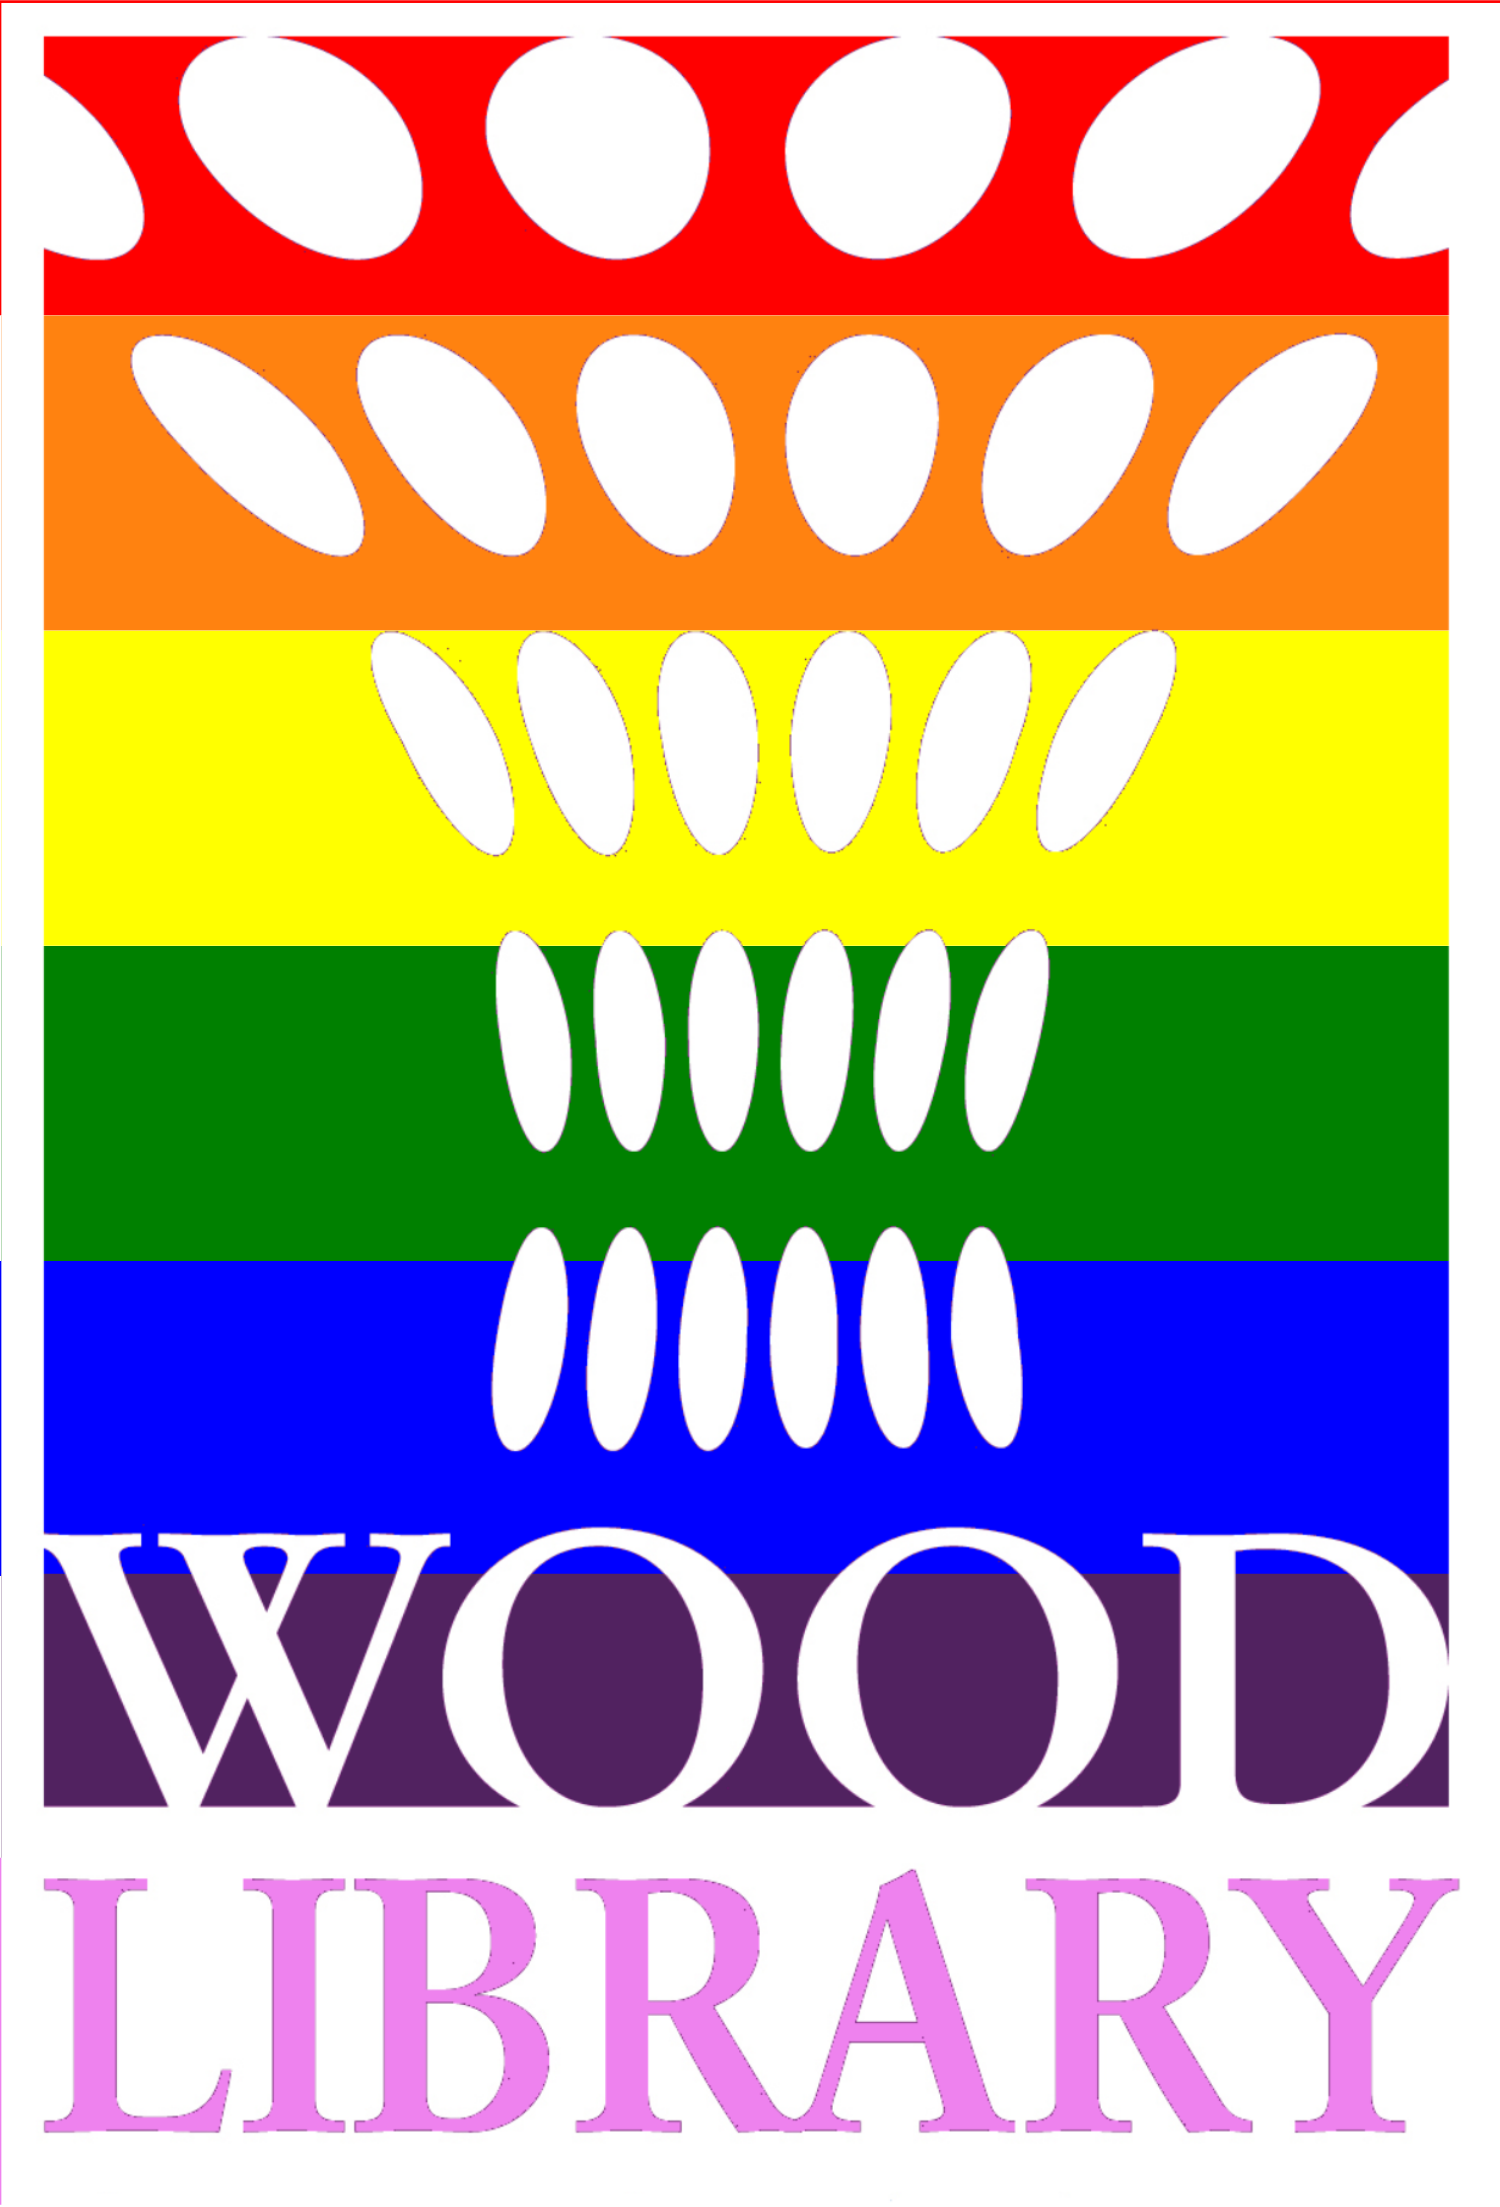 Wood Library Logo with a rainbow background